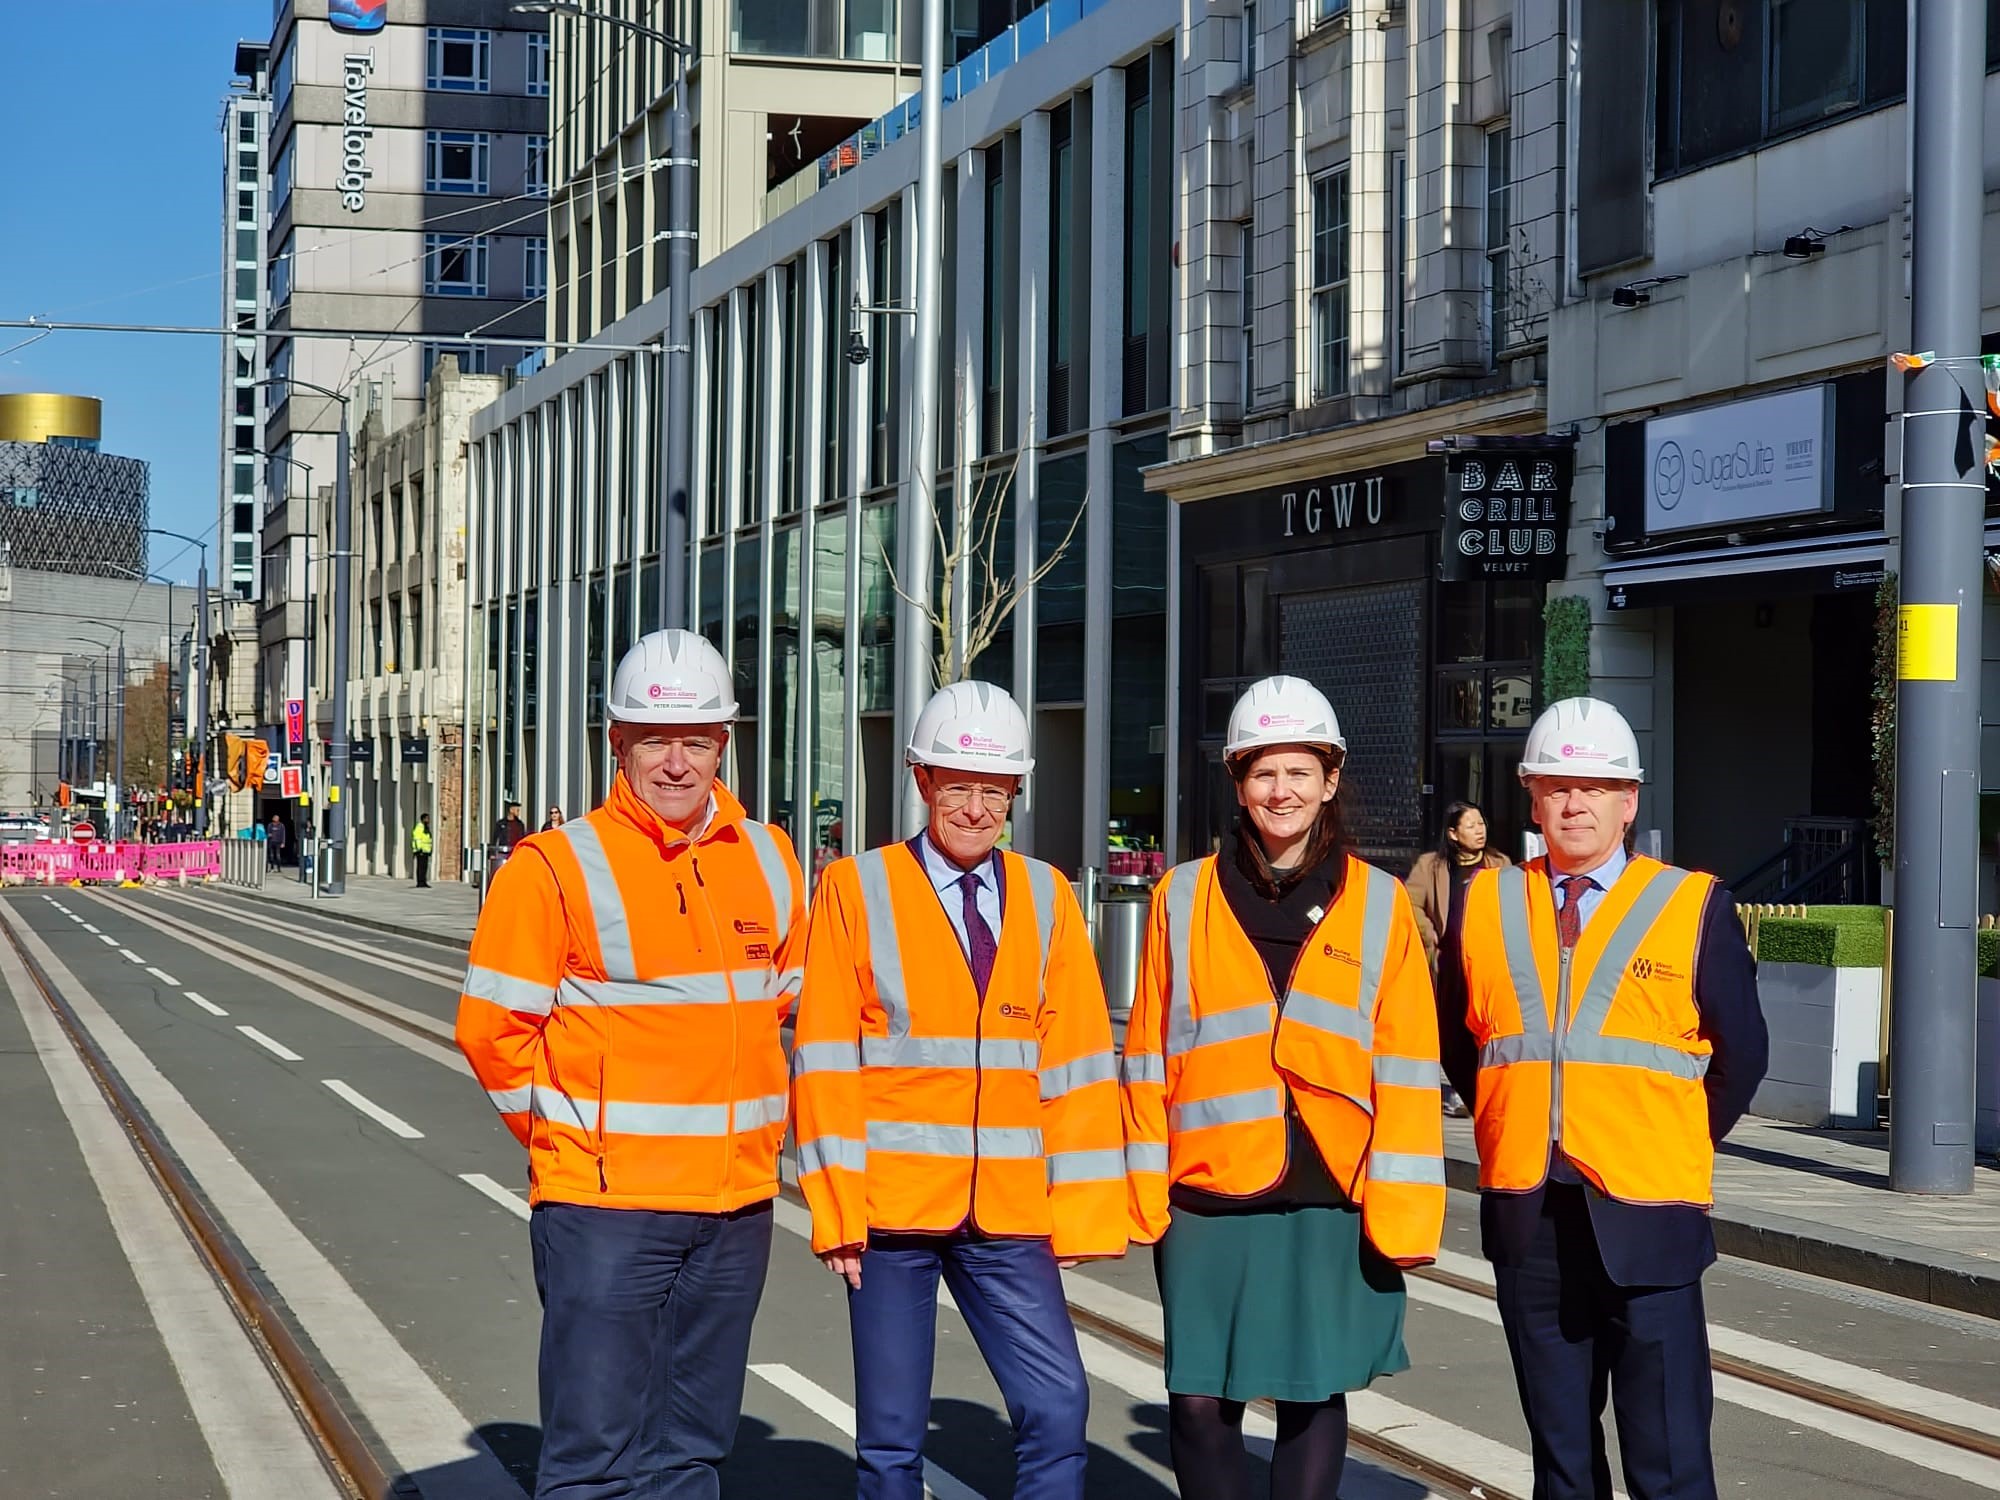 From left, Peter Cushing, director of Midland Metro Alliance; Andy Street, Mayor of the West Midlands; Cllr Brigid Jones, WMCA portfolio holder for inclusive communities and deputy leader of Birmingham City Council with Michael Anderson, West Midlands Metro projects director, celebrating the Metro construction entering its final stages.